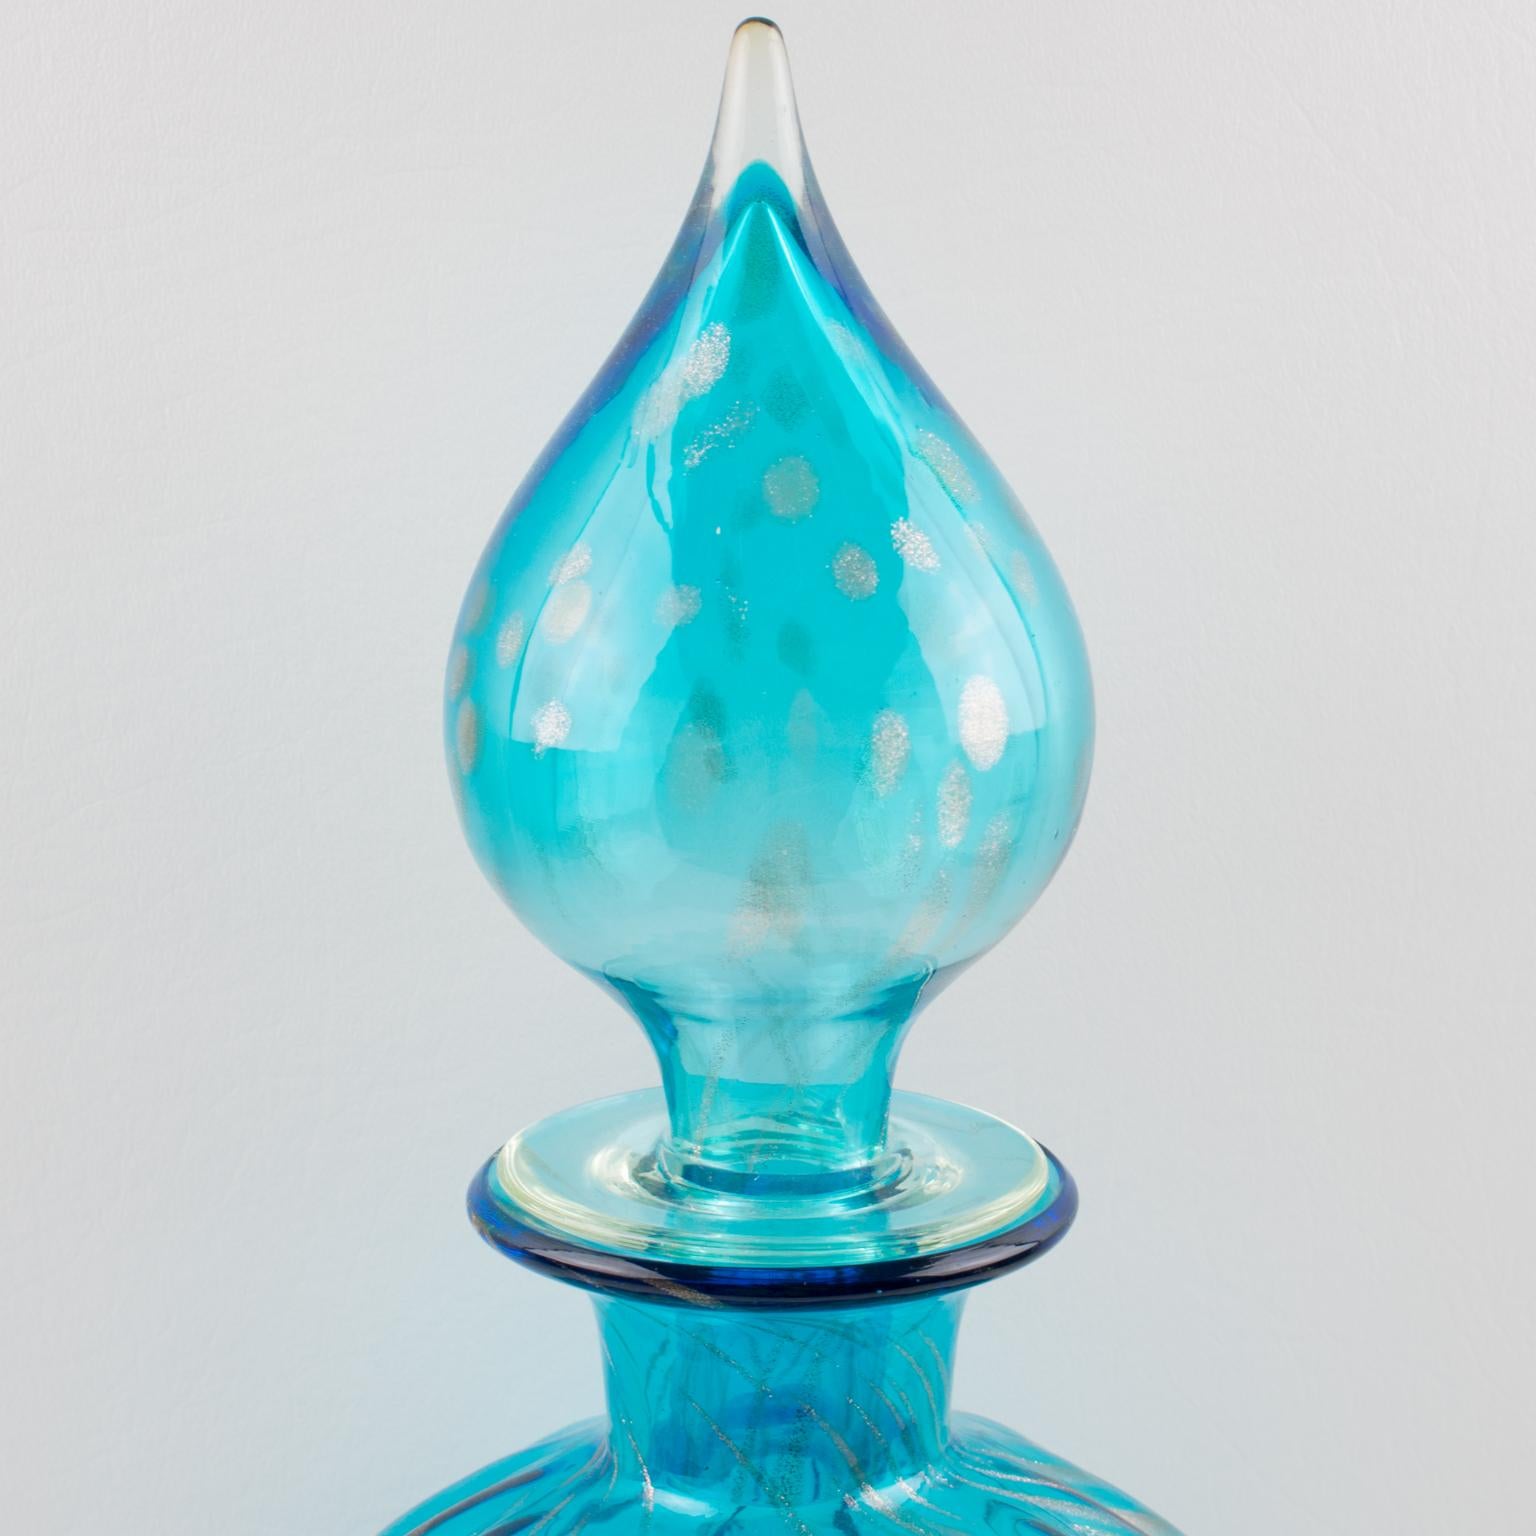 Blown Glass Empoli Italy Turquoise Glass Lidded Apothecary Jar Dispenser